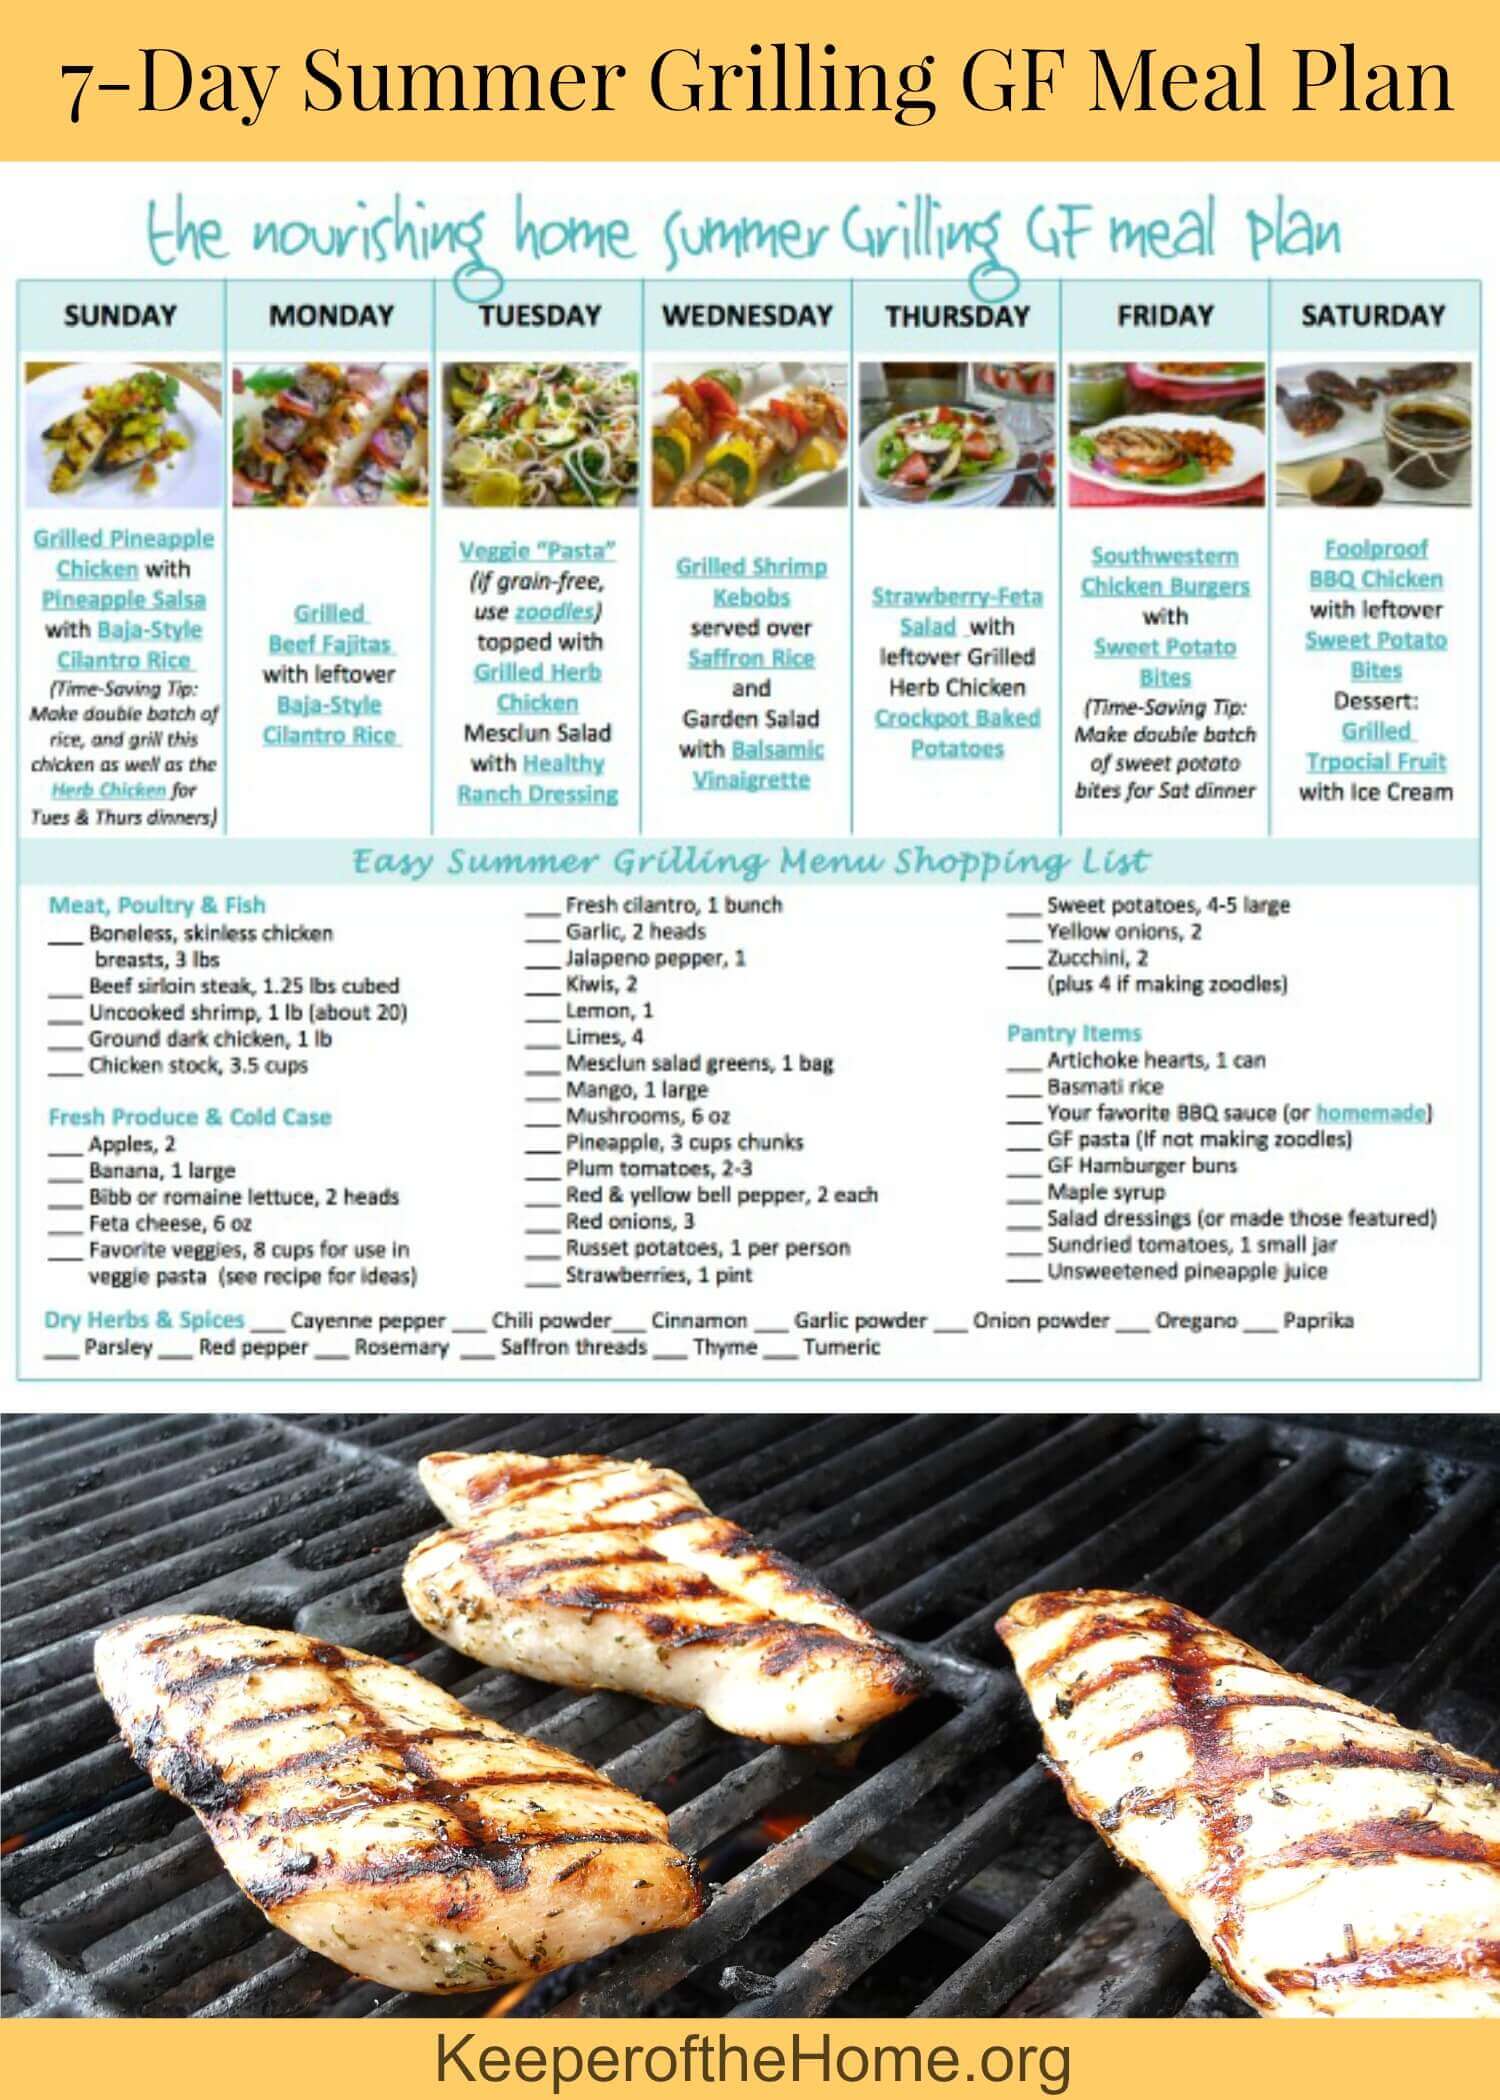 Hit the grill this summer with this 7-Day Summer Grilling Meal Plan just for you! It's gluten free and allergy friendly – plus you don't have to heat up the house cooking in the kitchen!